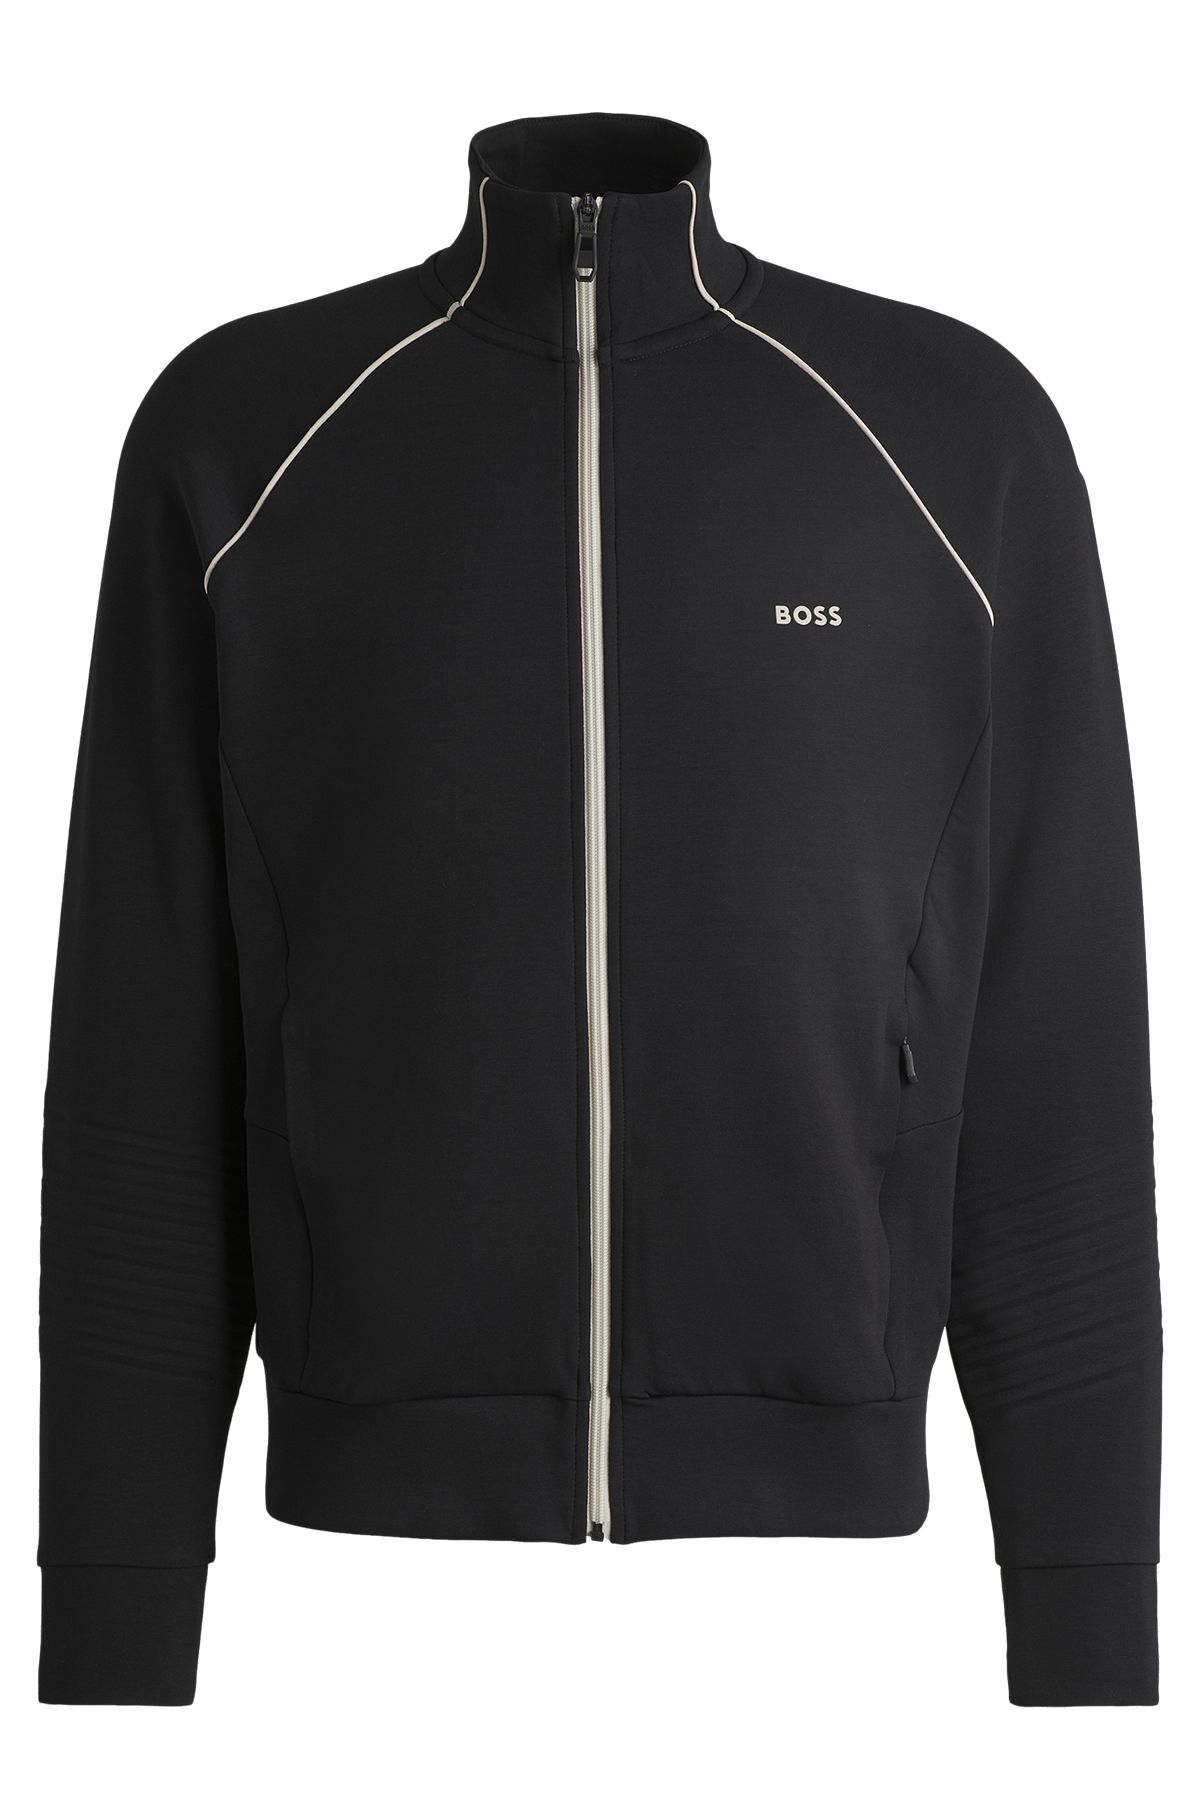 Stretch-cotton zip-up sweatshirt with piping and branding, Black